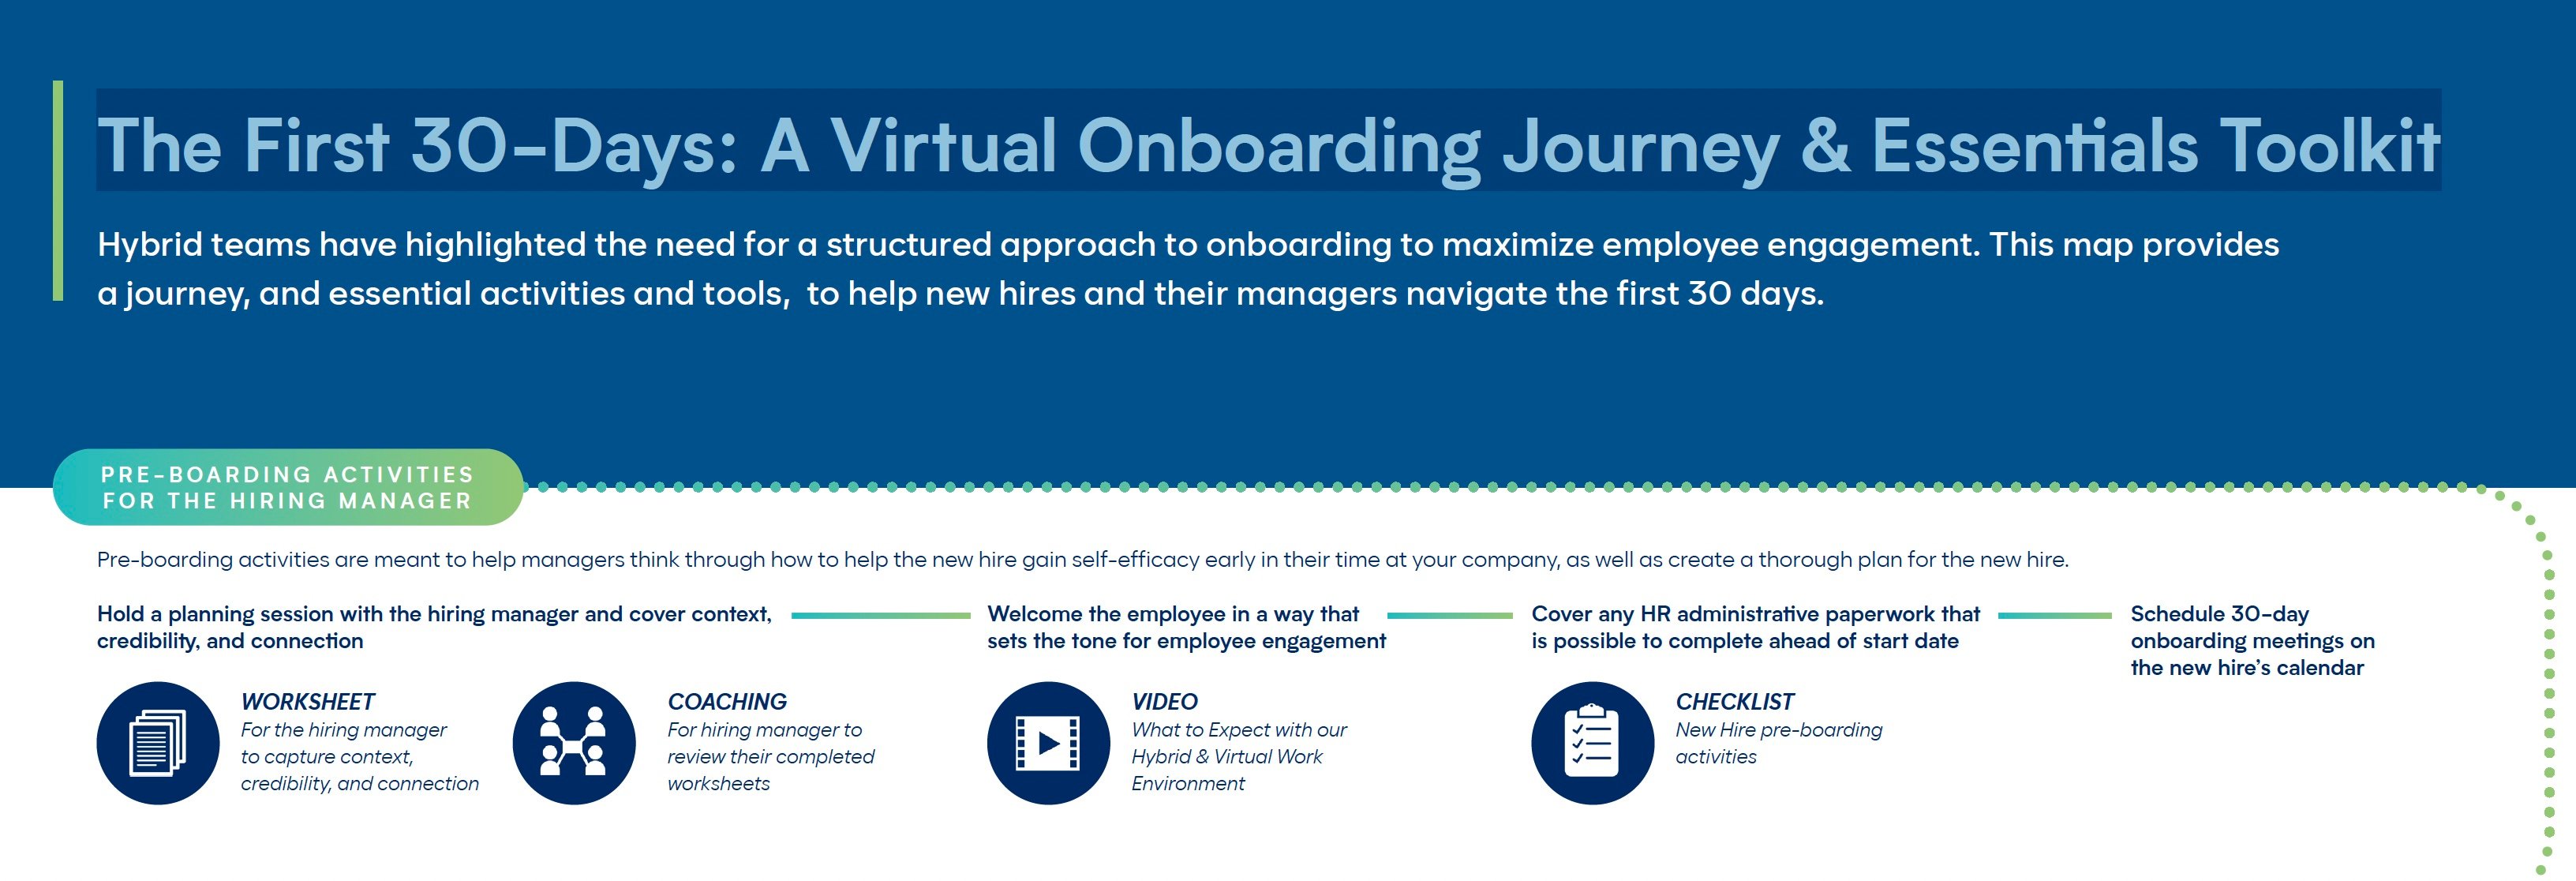 The First 30 - Days: A Virtual Onboarding Learning Journey